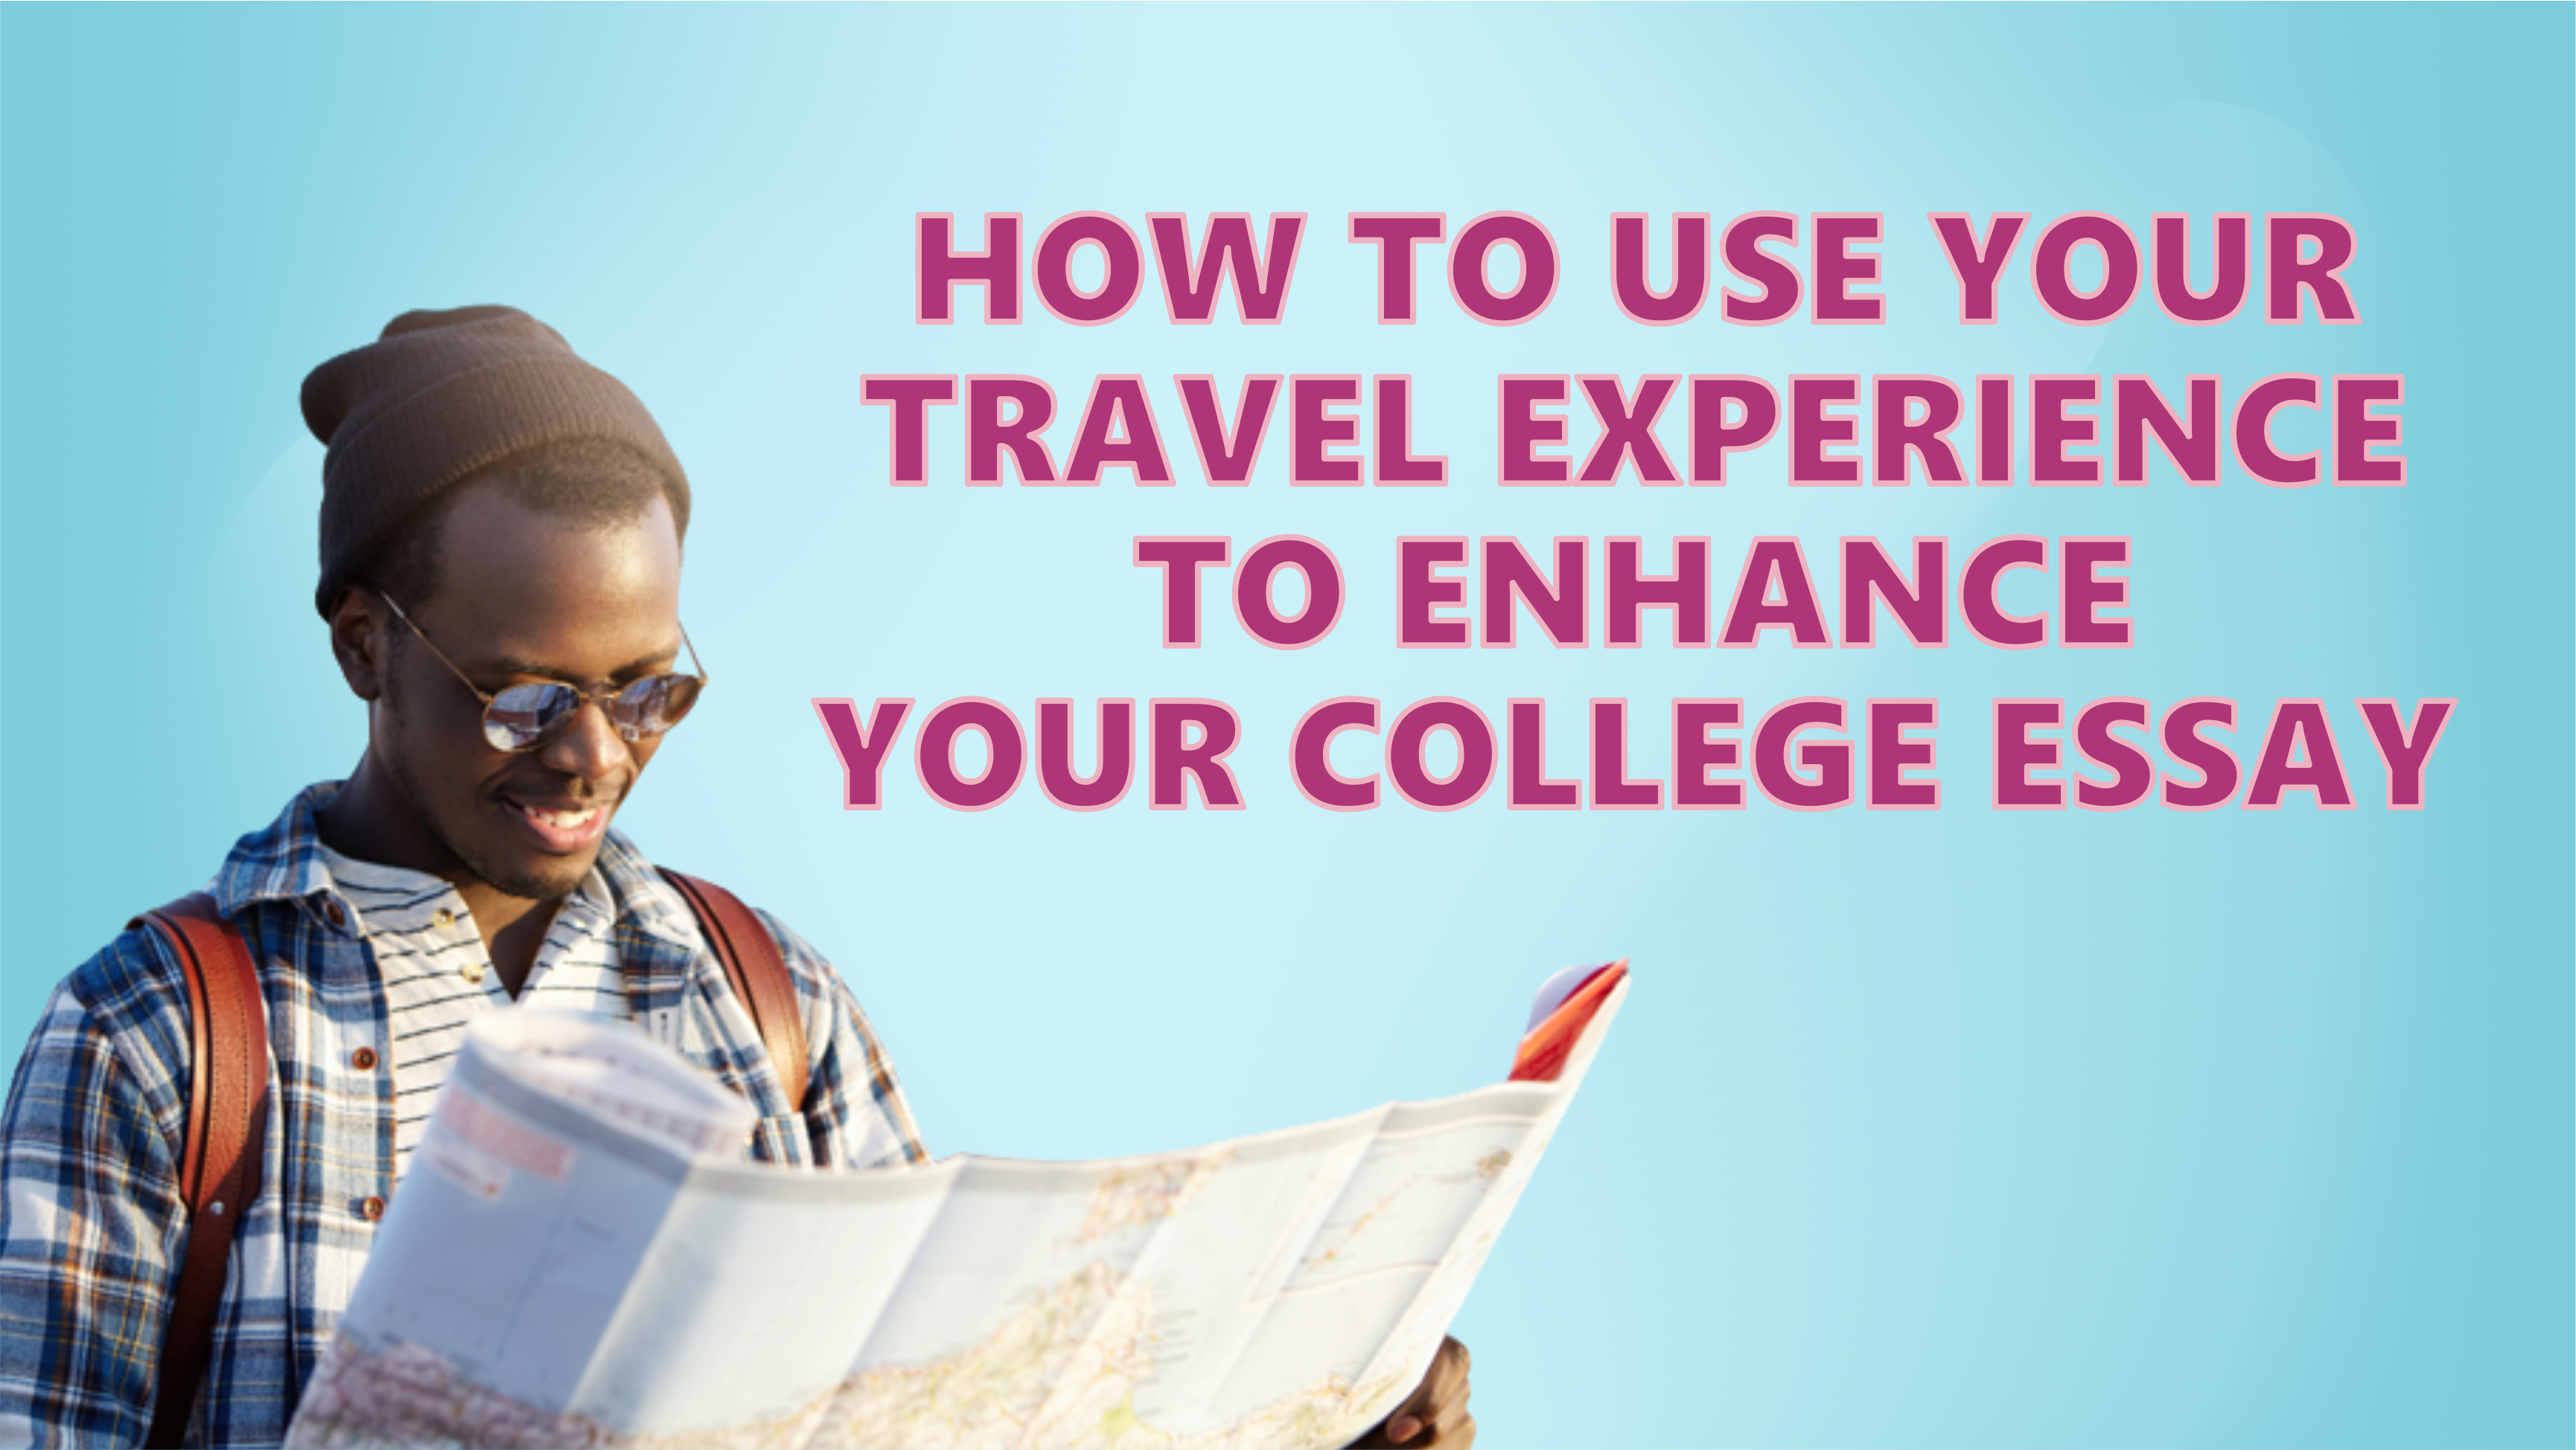 How to use your travel experiences to enhance your college essays